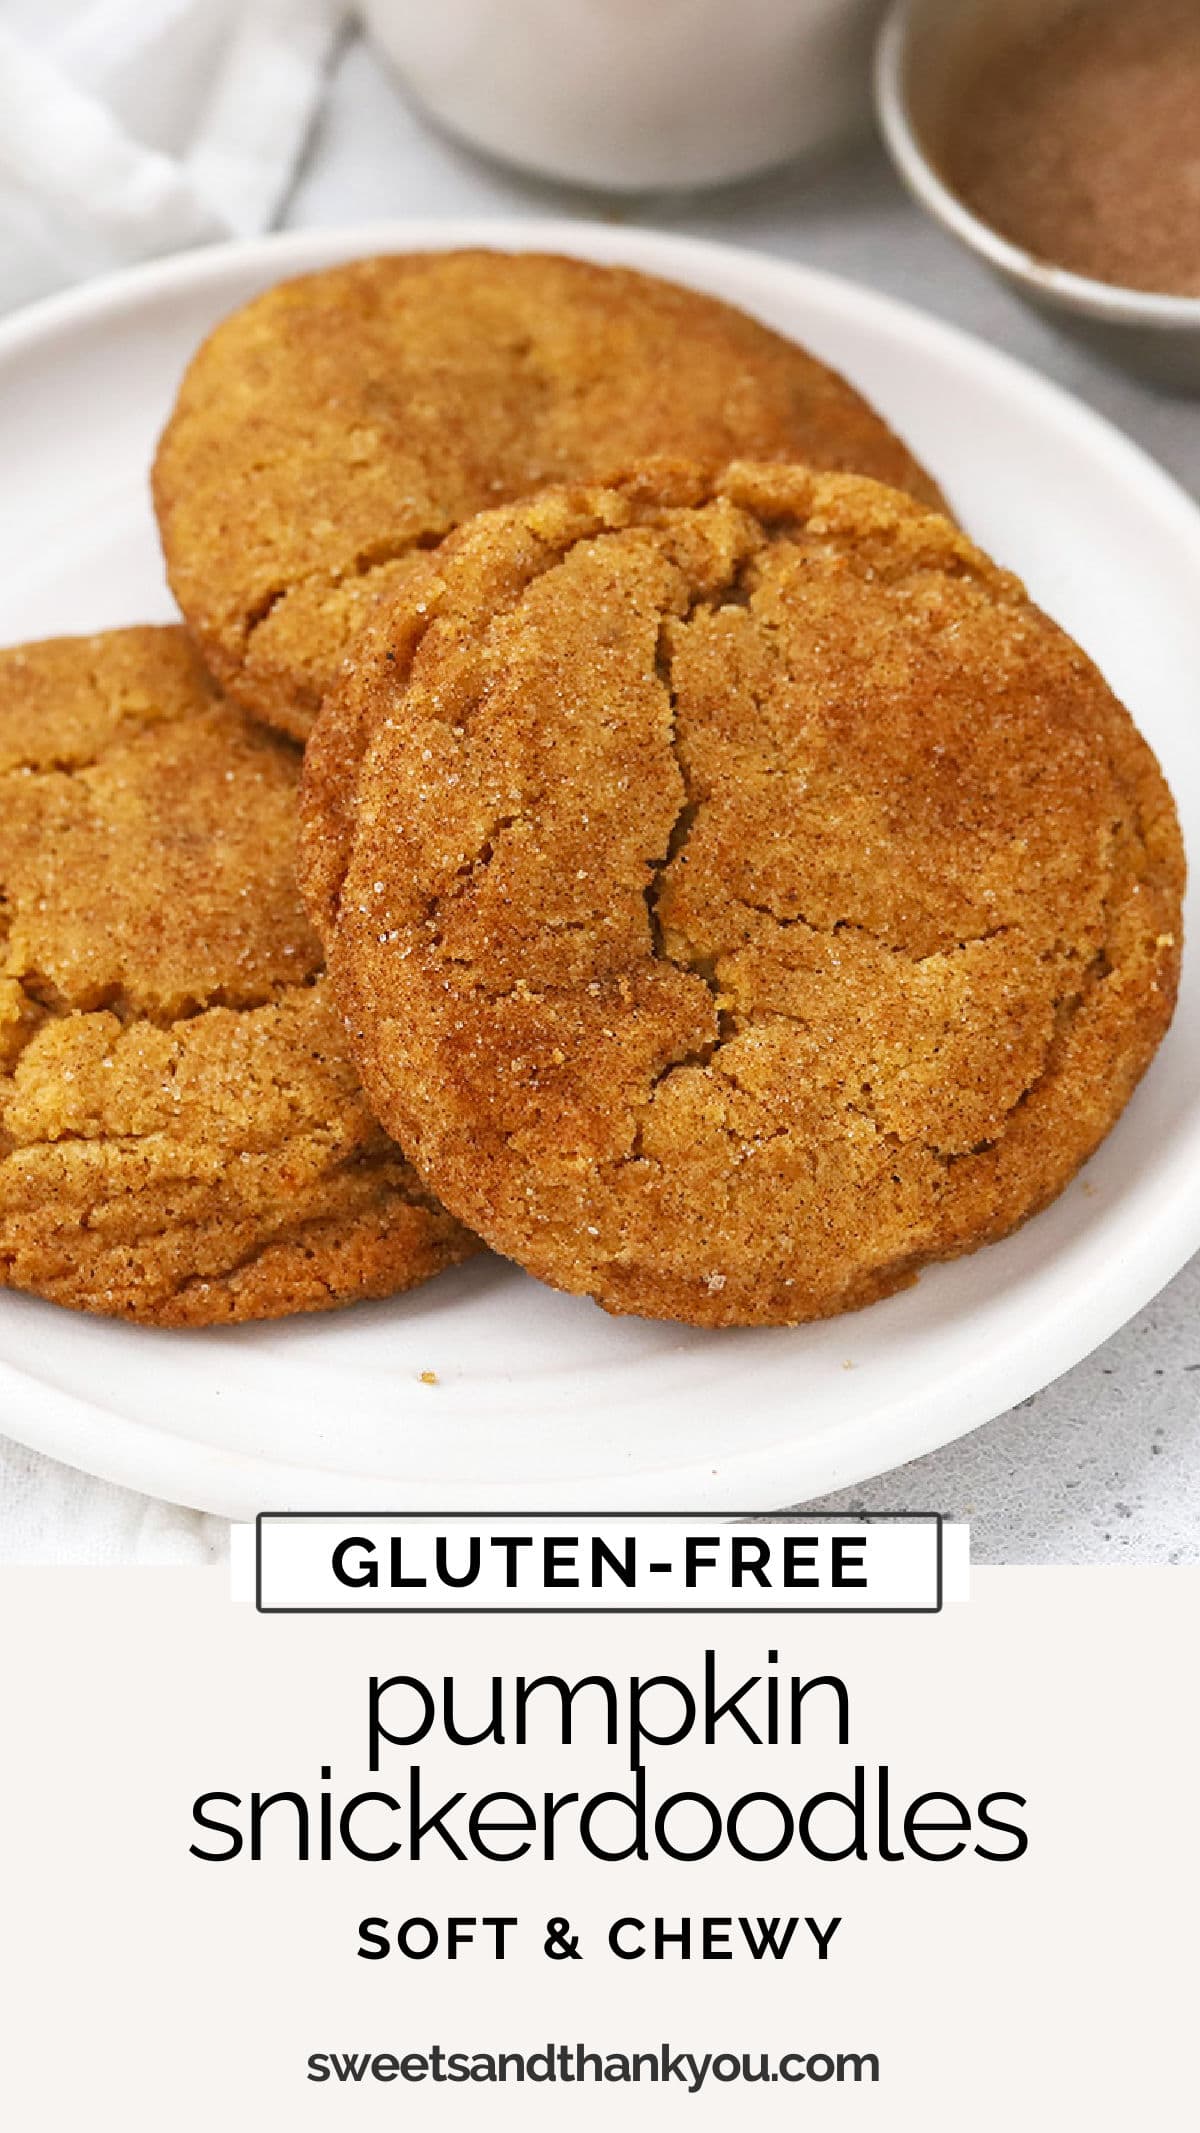 Gluten-Free Pumpkin Snickerdoodles - These soft, chewy gluten-free pumpkin snickerdoodle cookies are perfect when the weather gets chilly! // gluten-free pumpkin cookies / gluten-free holiday cookies / gluten-free pumpkin recipes / gluten-free snickerdoodles recipe / gluten-free snickerdoodle cookies / chewy pumpkin cookies / easy gluten-free cookies recipe / gluten-free cookies recipe